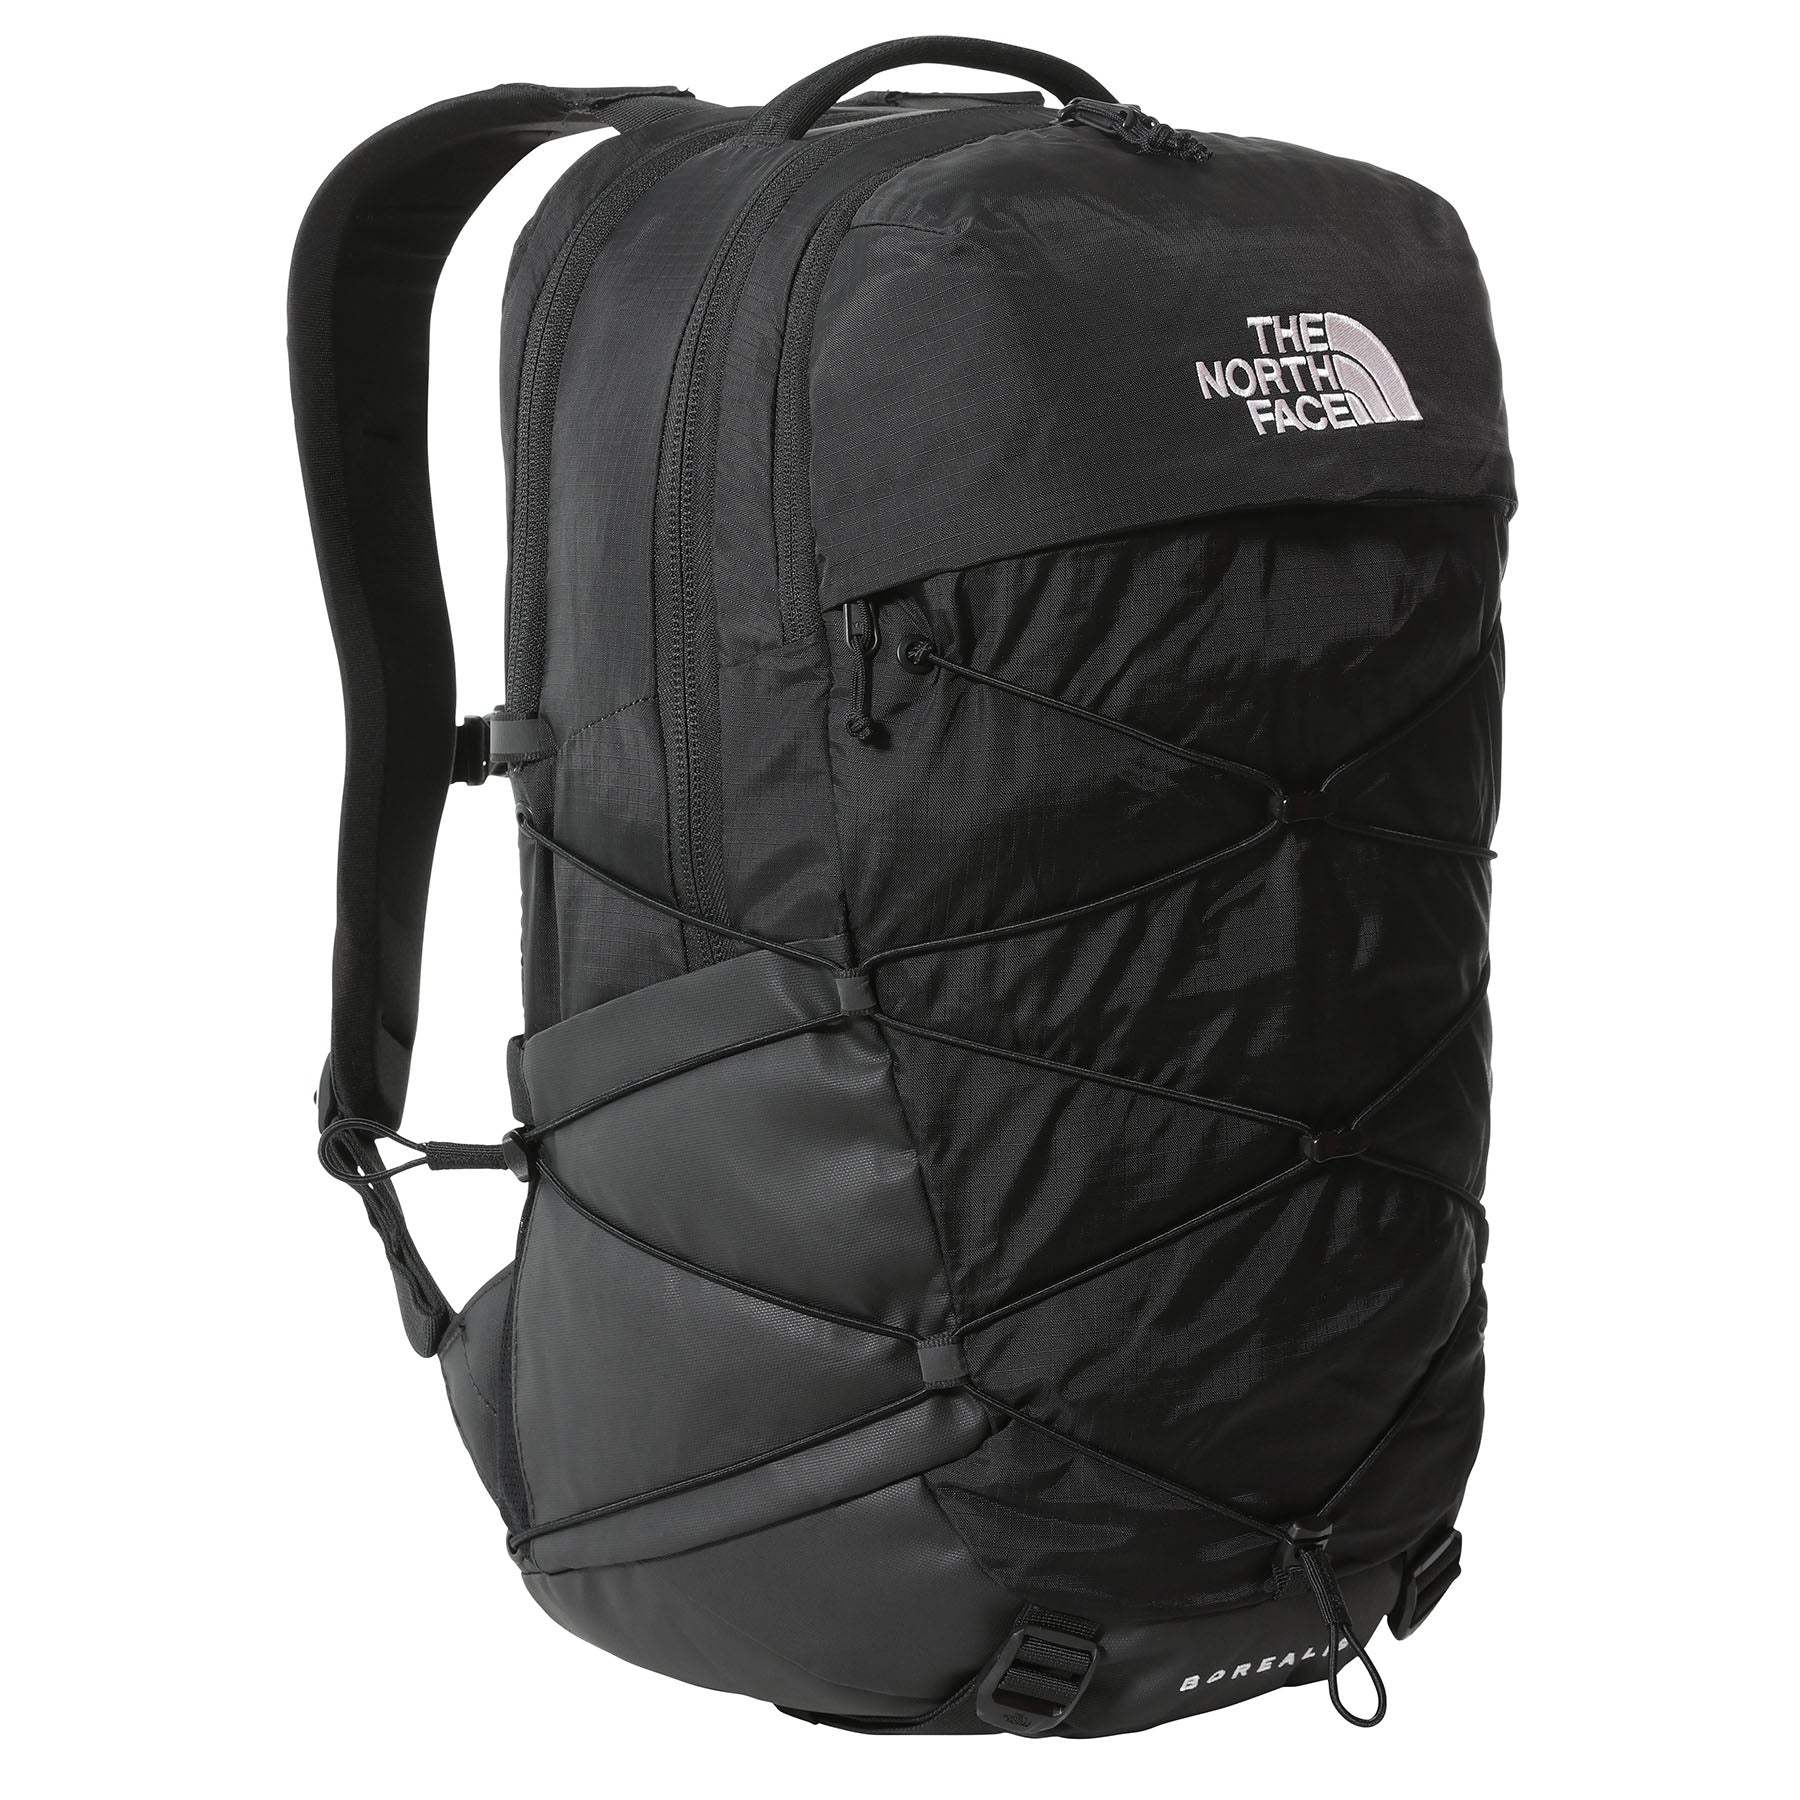 The North Face Borealis Backpack – 53 Degrees North